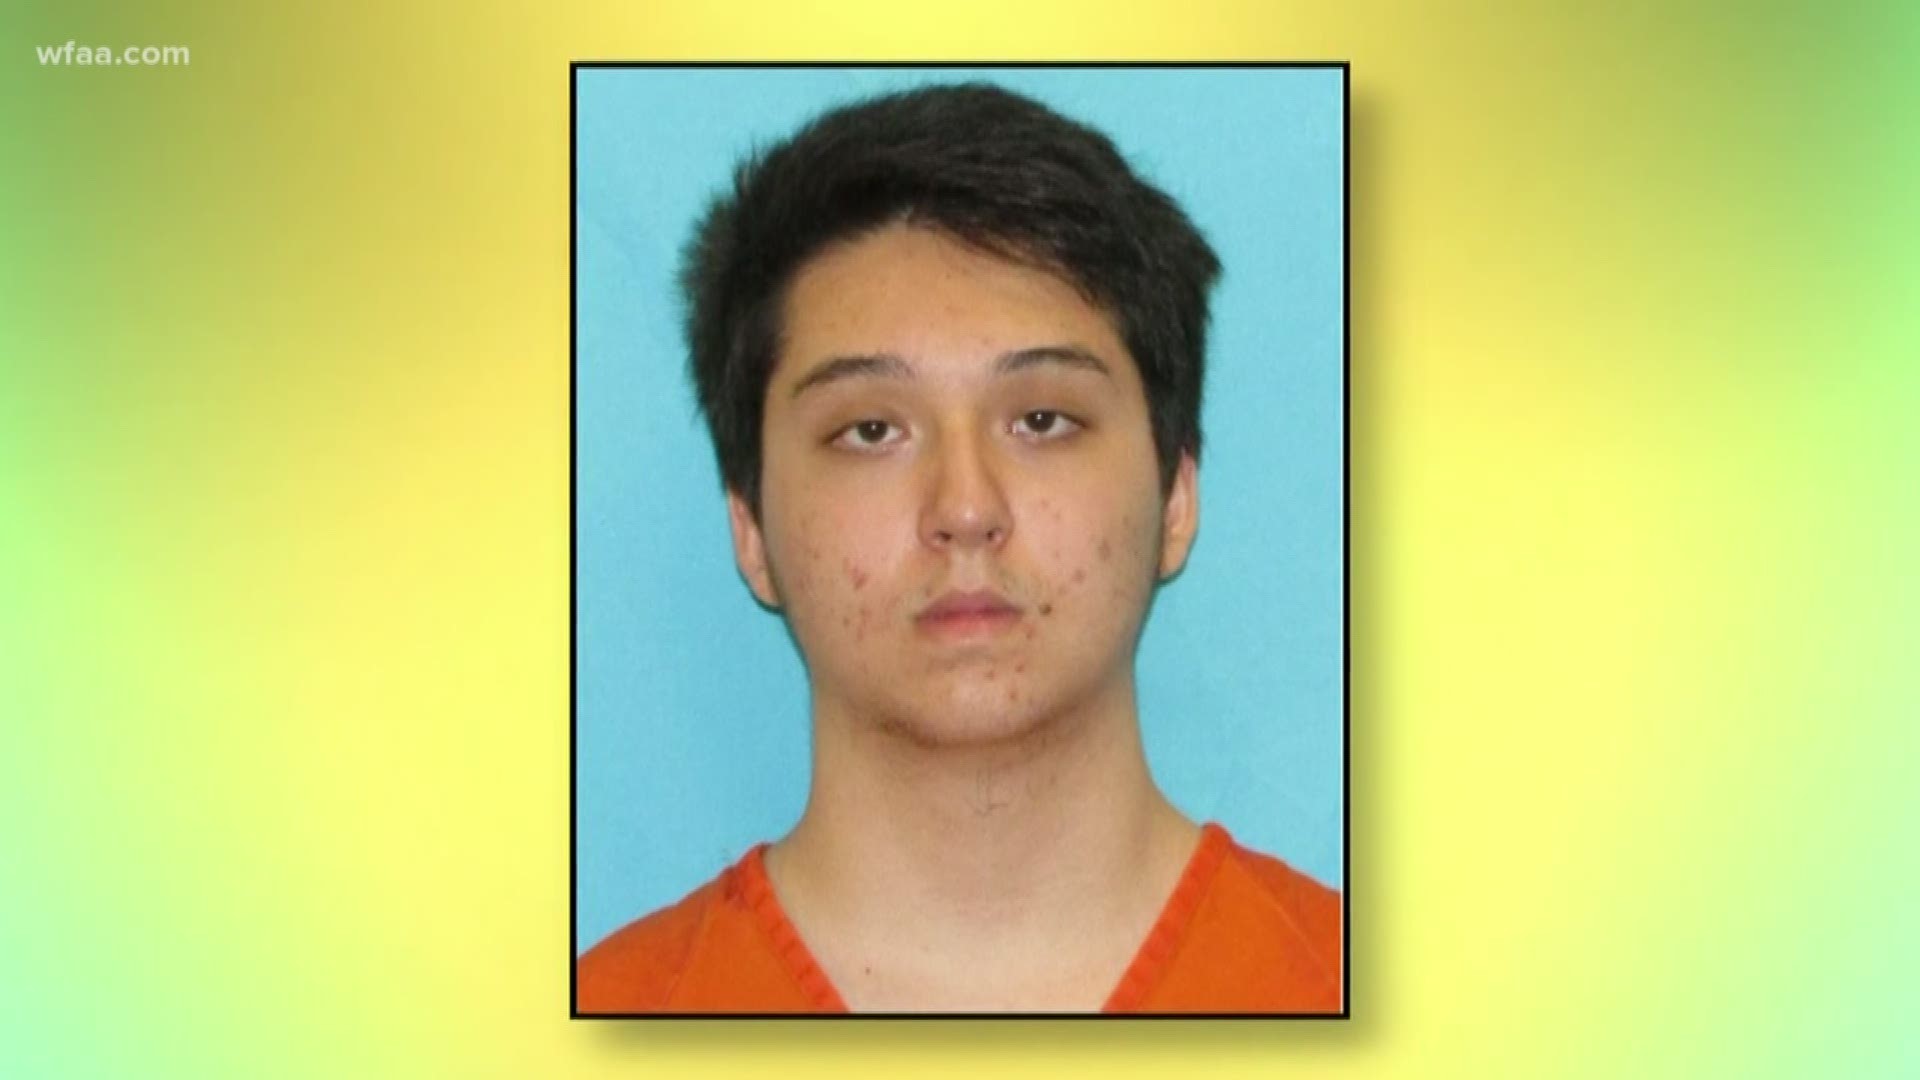 Detectives say the teen spent month planning an ISIS-inspired attack at Stonebriar mall in Frisco.